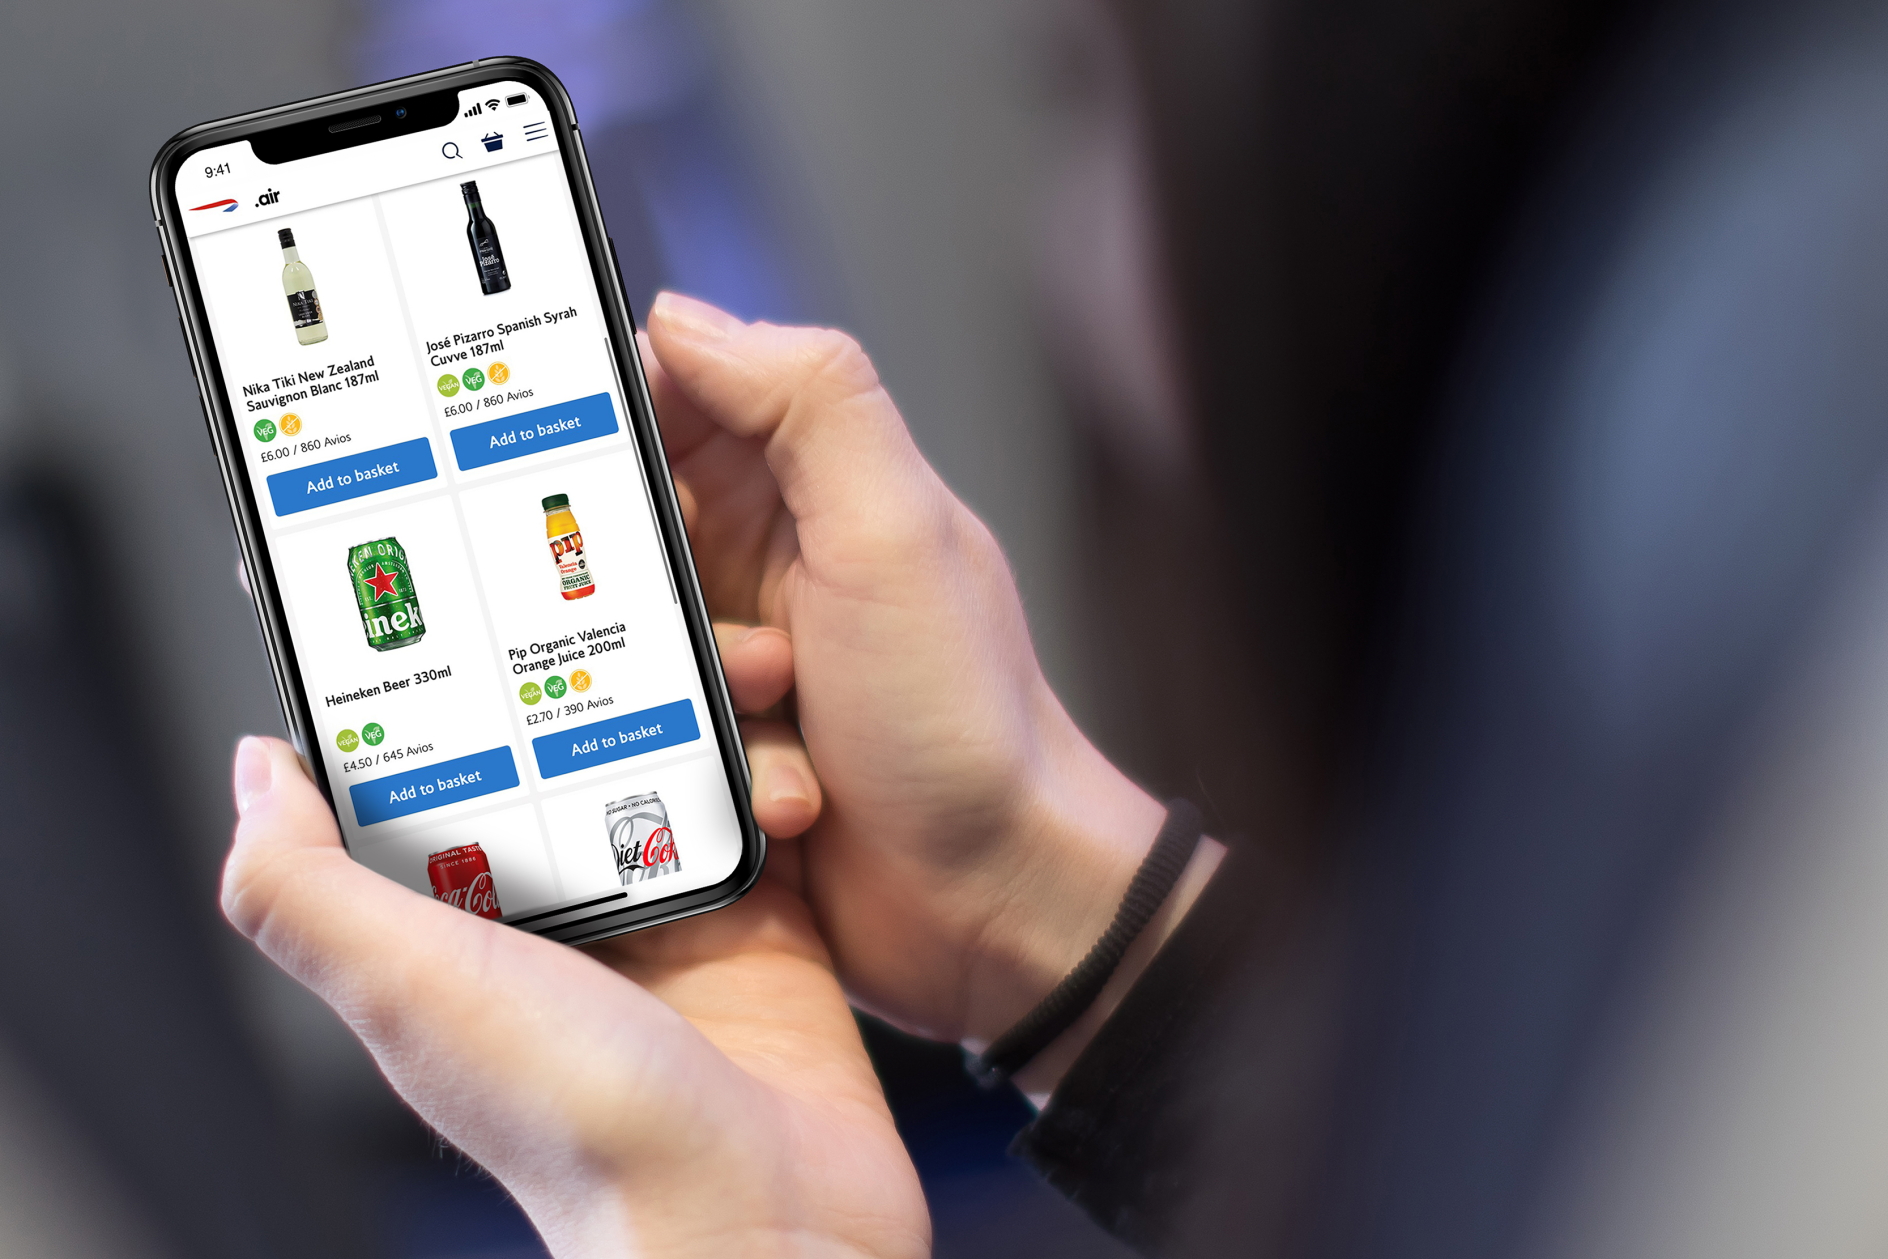 British Airways will launch a new inflight digital ordering platform next week, giving customers travelling in Euro Traveller the option to order additional snacks and drinks mid-flight, directly to their seat. Click to enlarge.